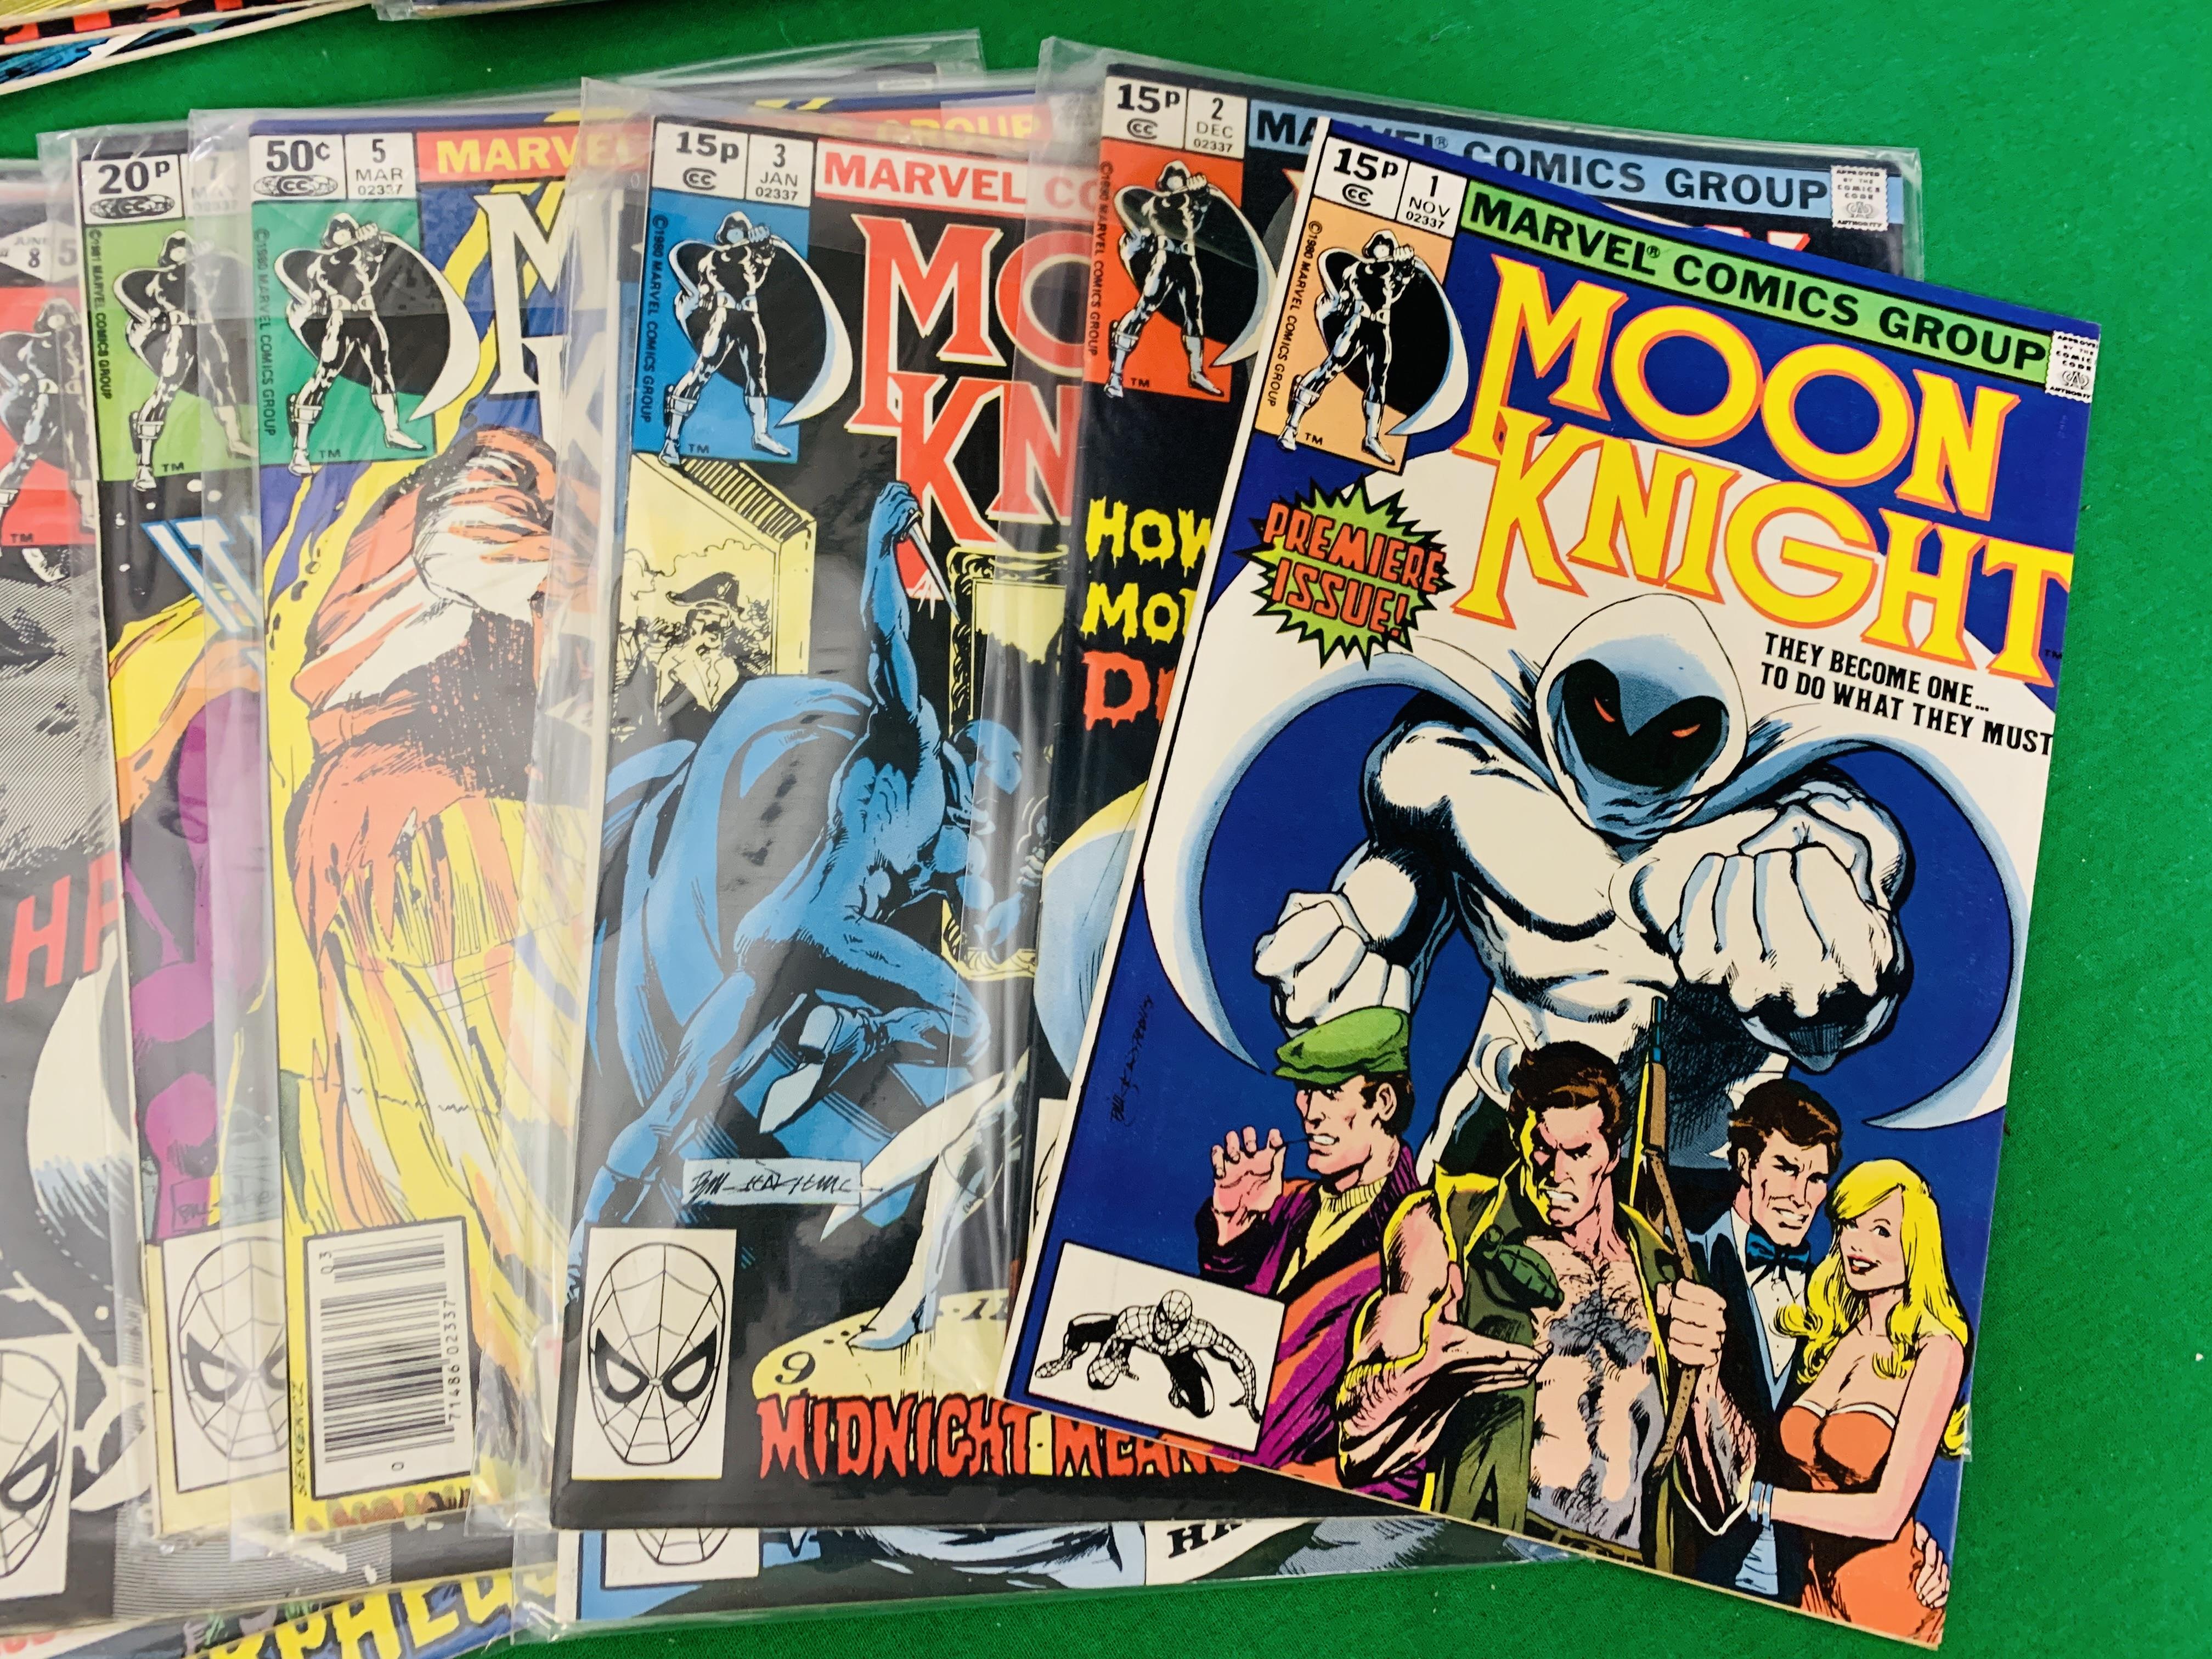 MARVEL COMICS MOONKNIGHT NO. 1 - 38 FROM 1980, FIRST SOLO SERIES, NO. - Image 2 of 7